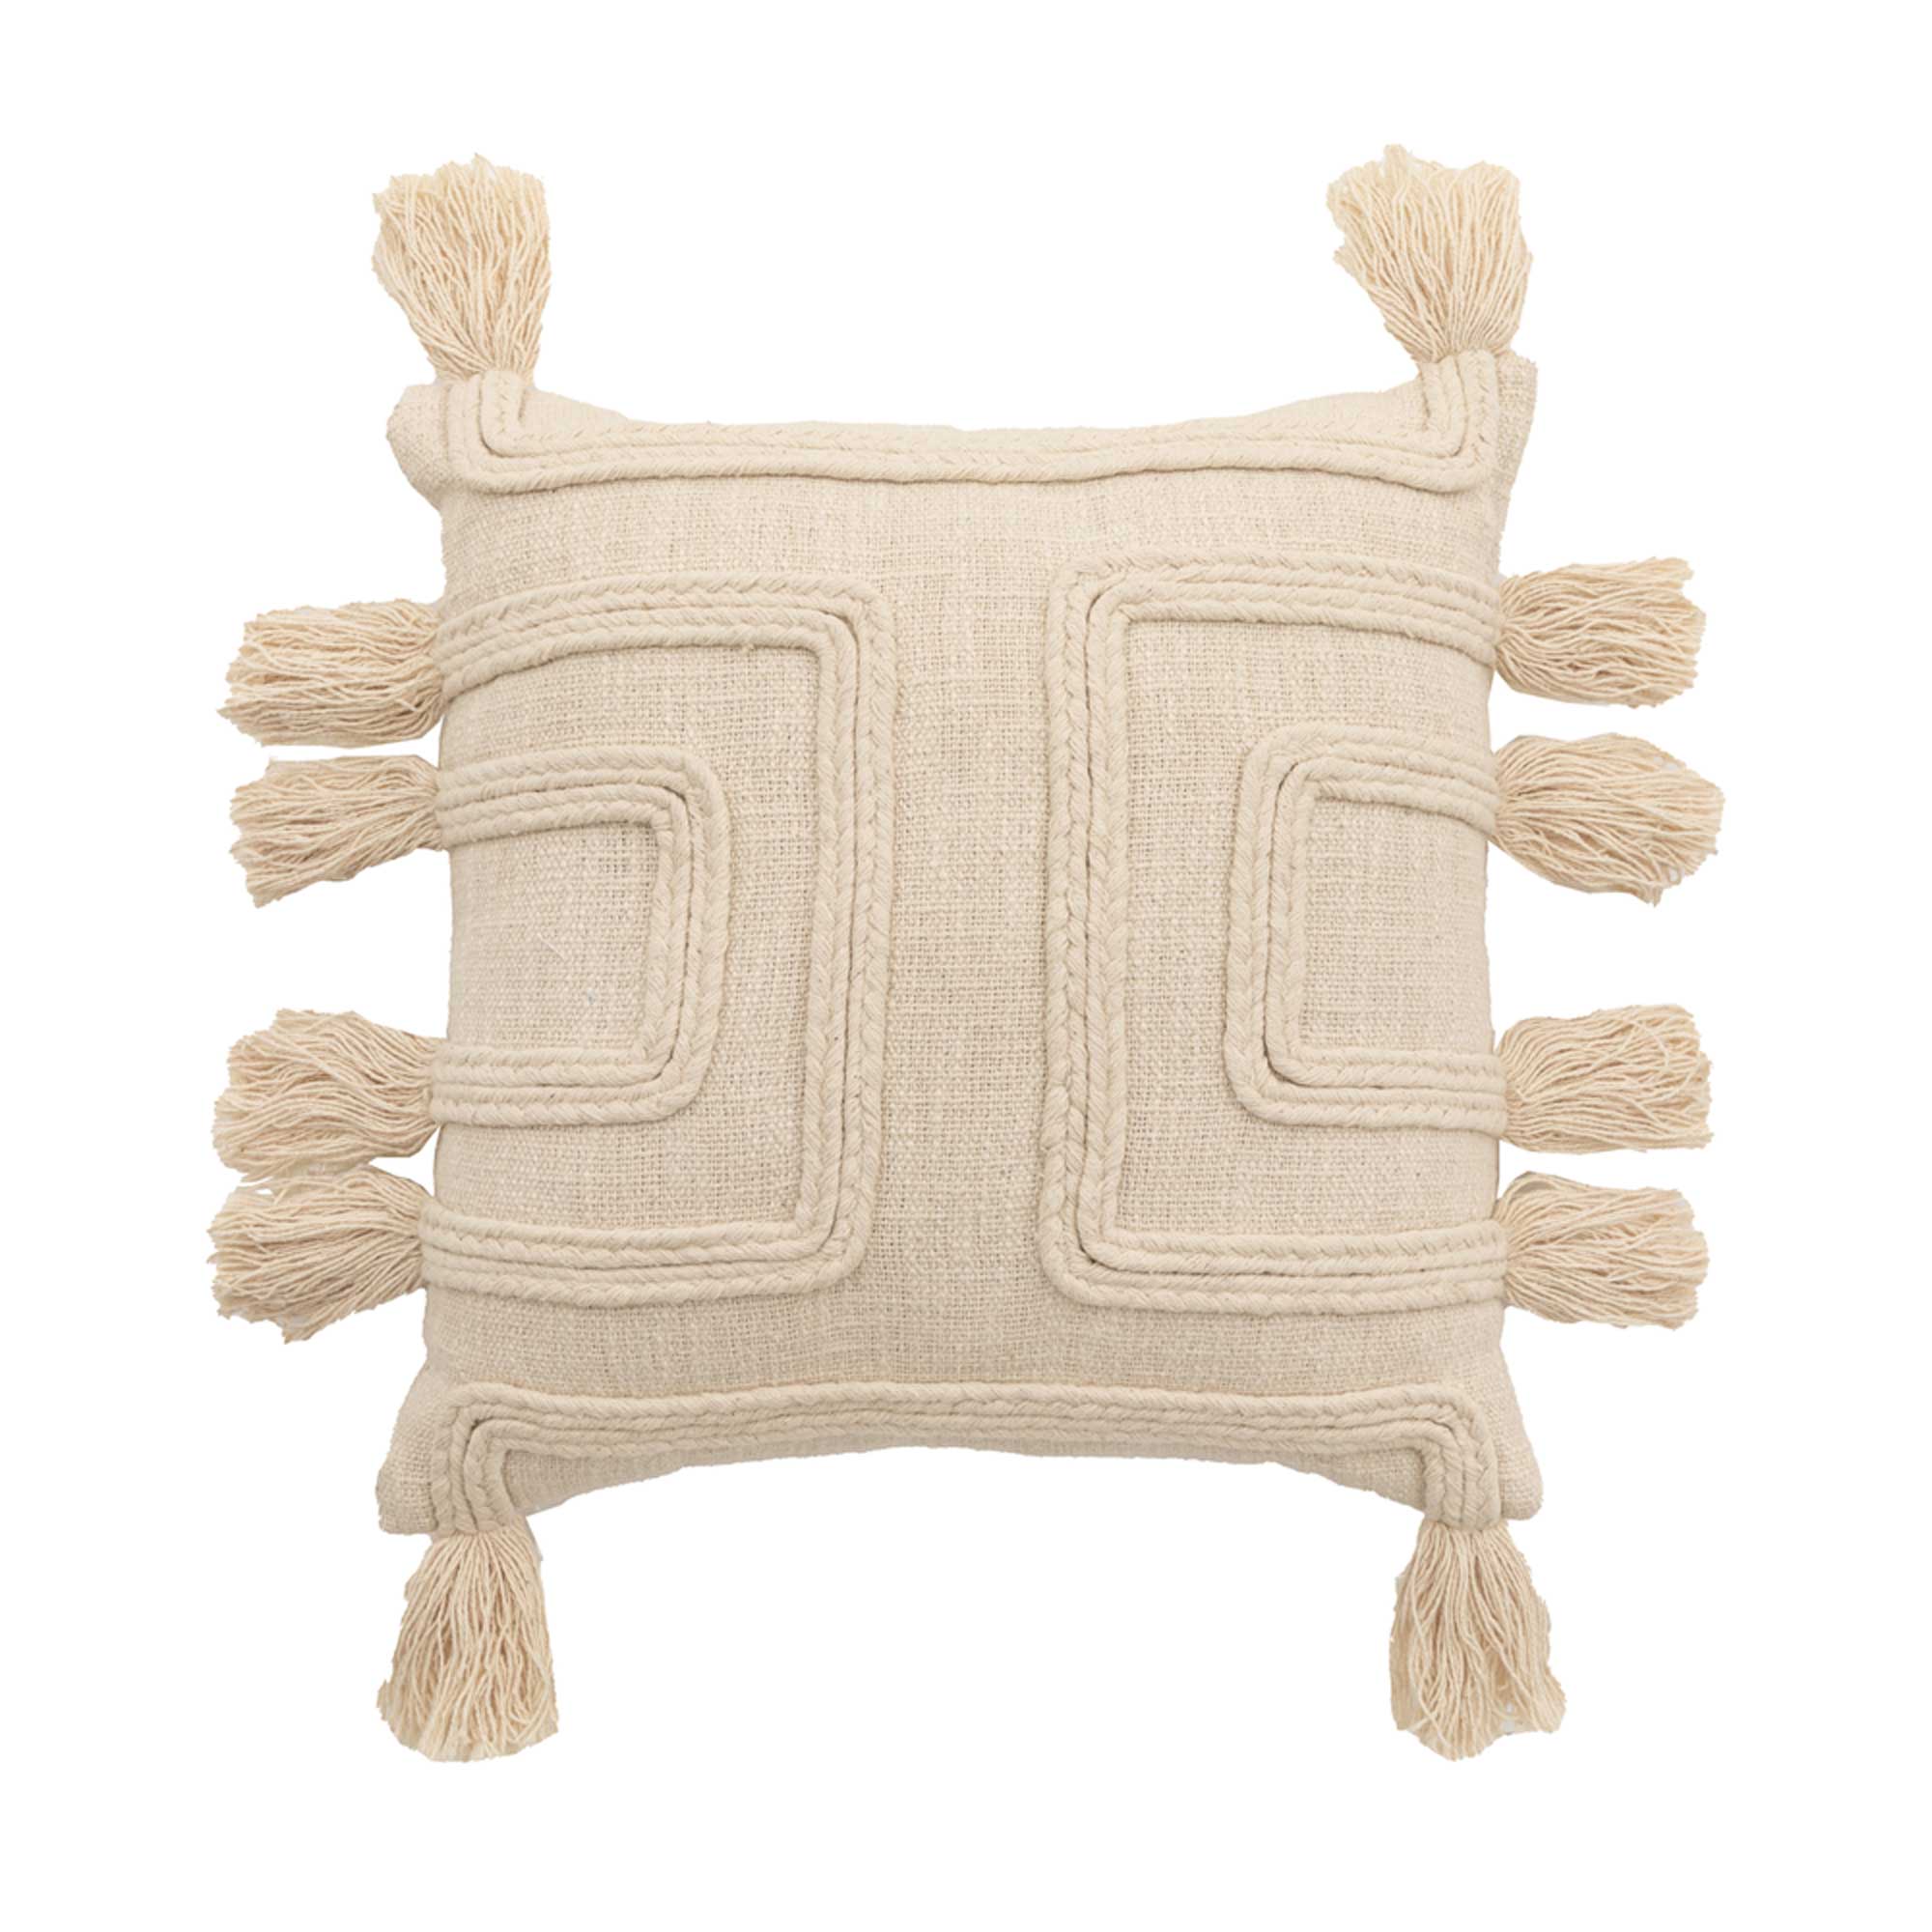 Woven Pleated Cushion, Square, Neutral | Barker & Stonehouse